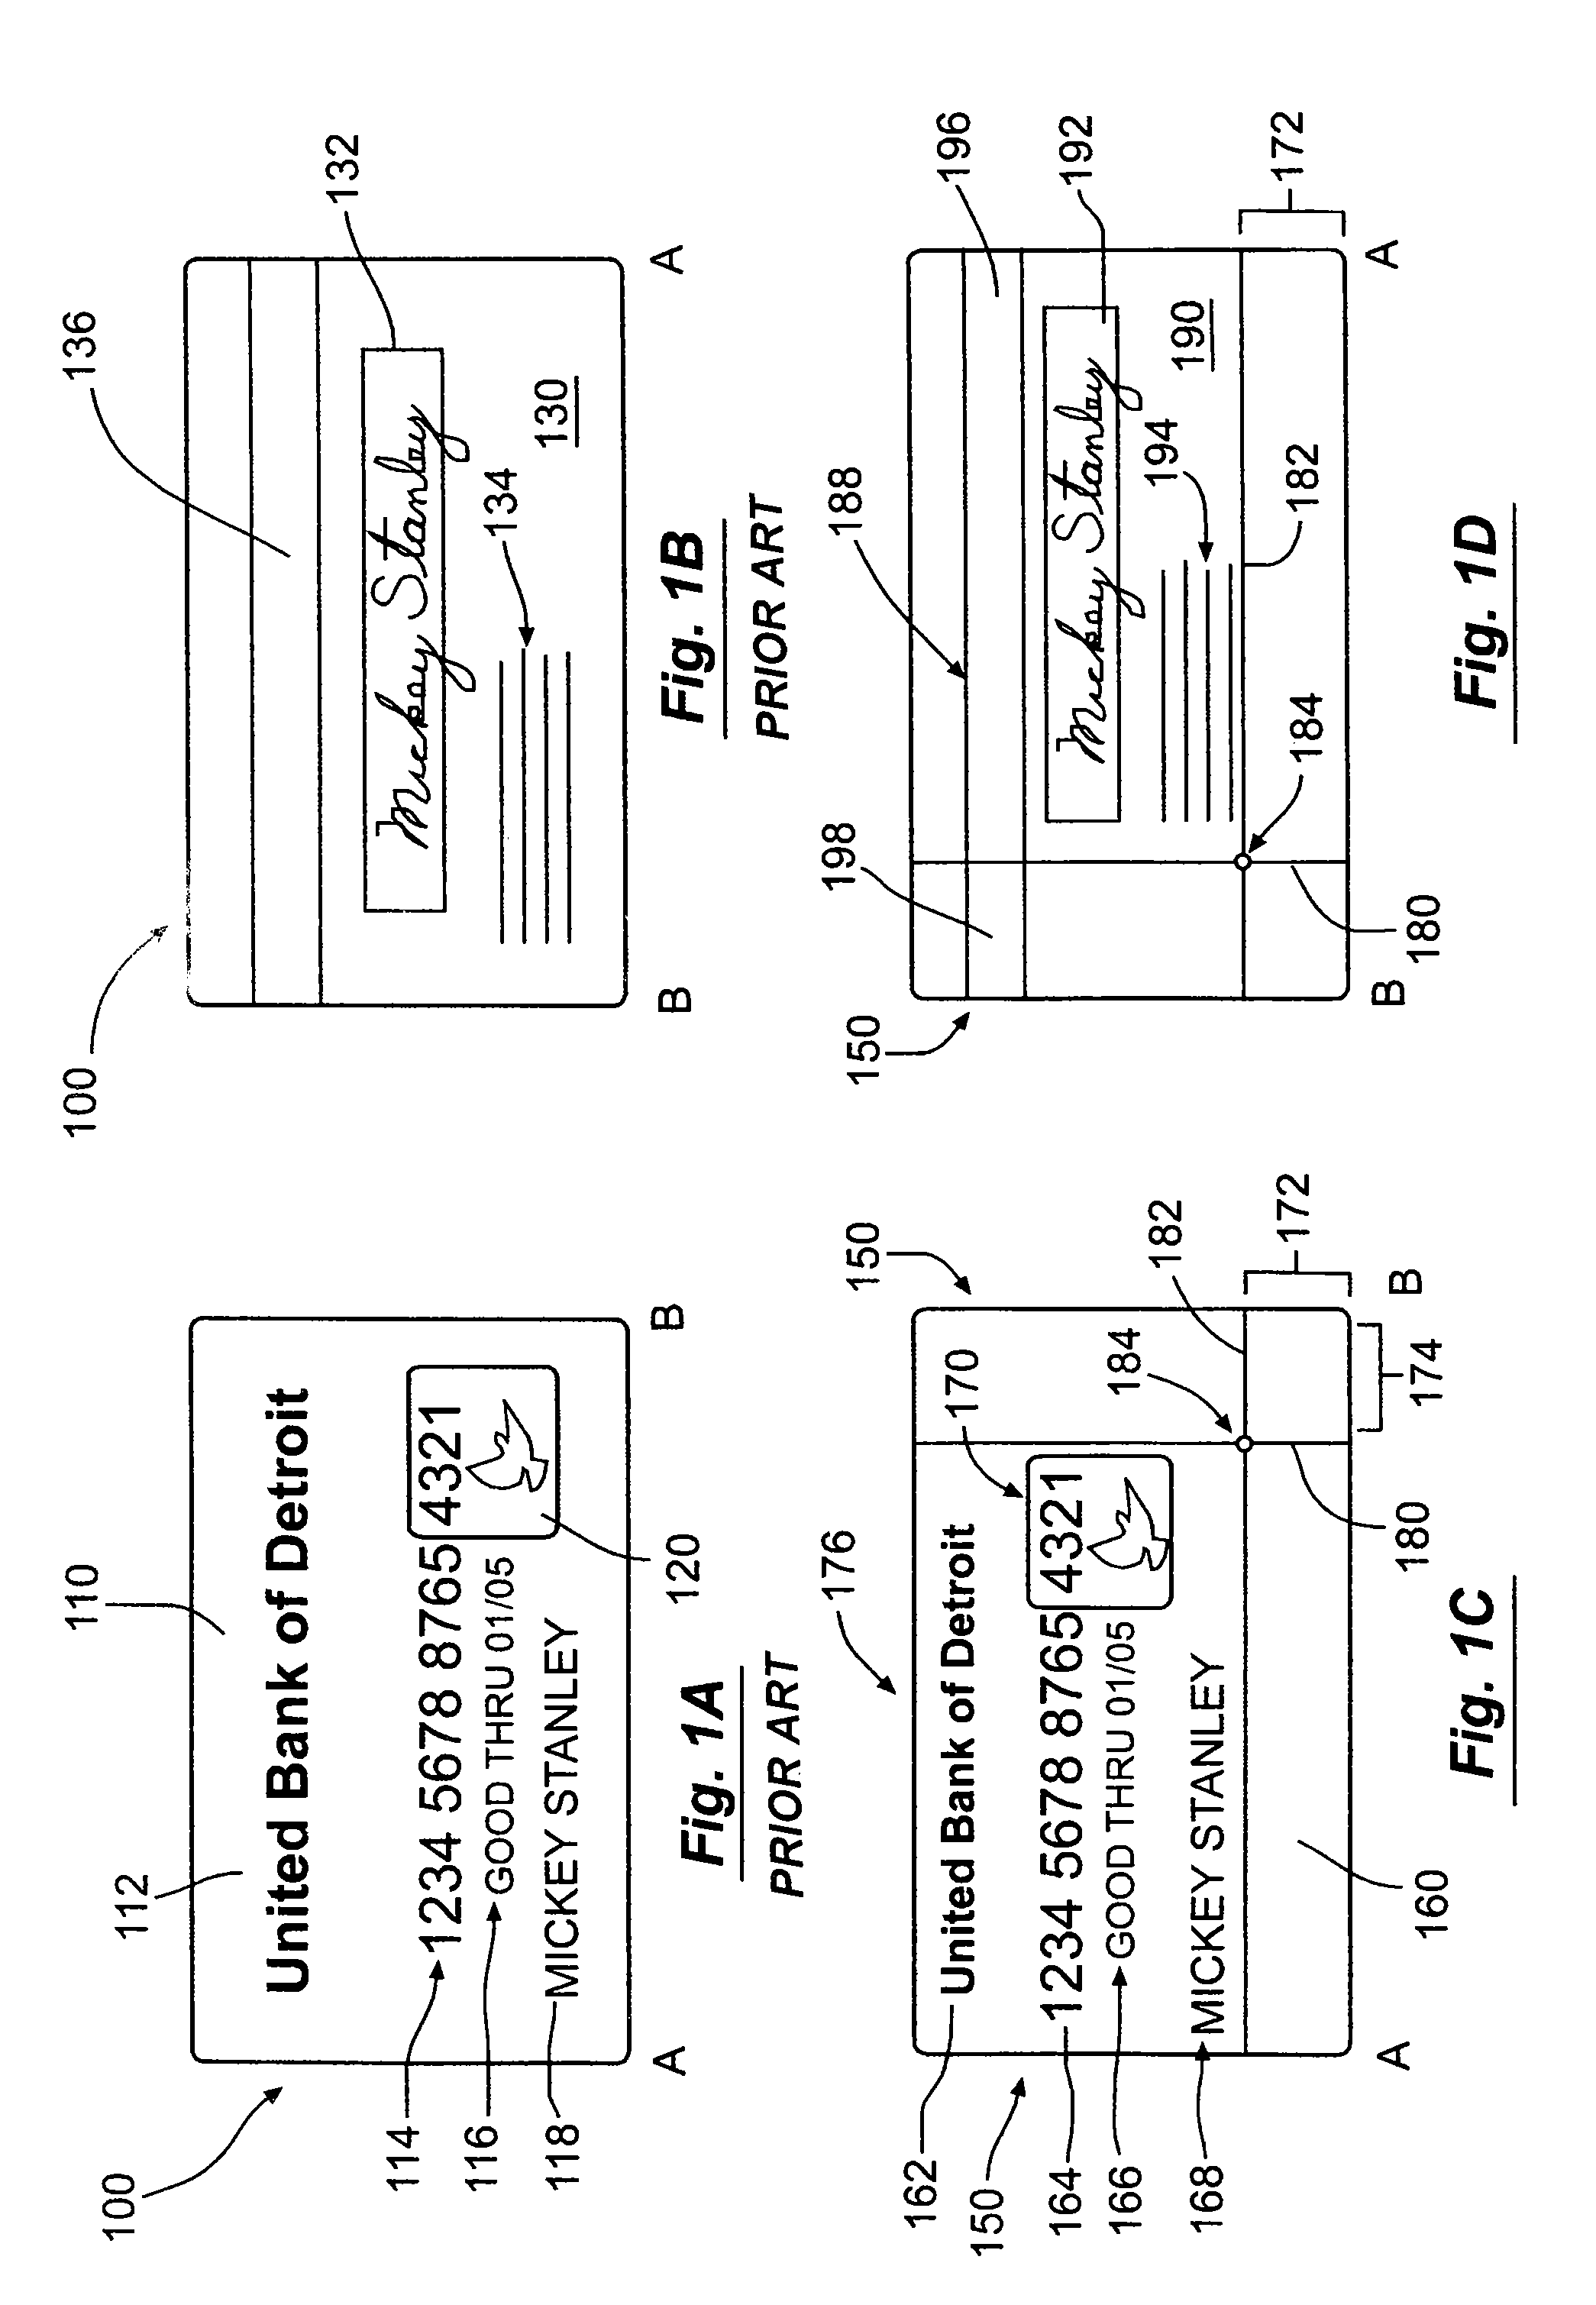 Mini card reader systems and methods